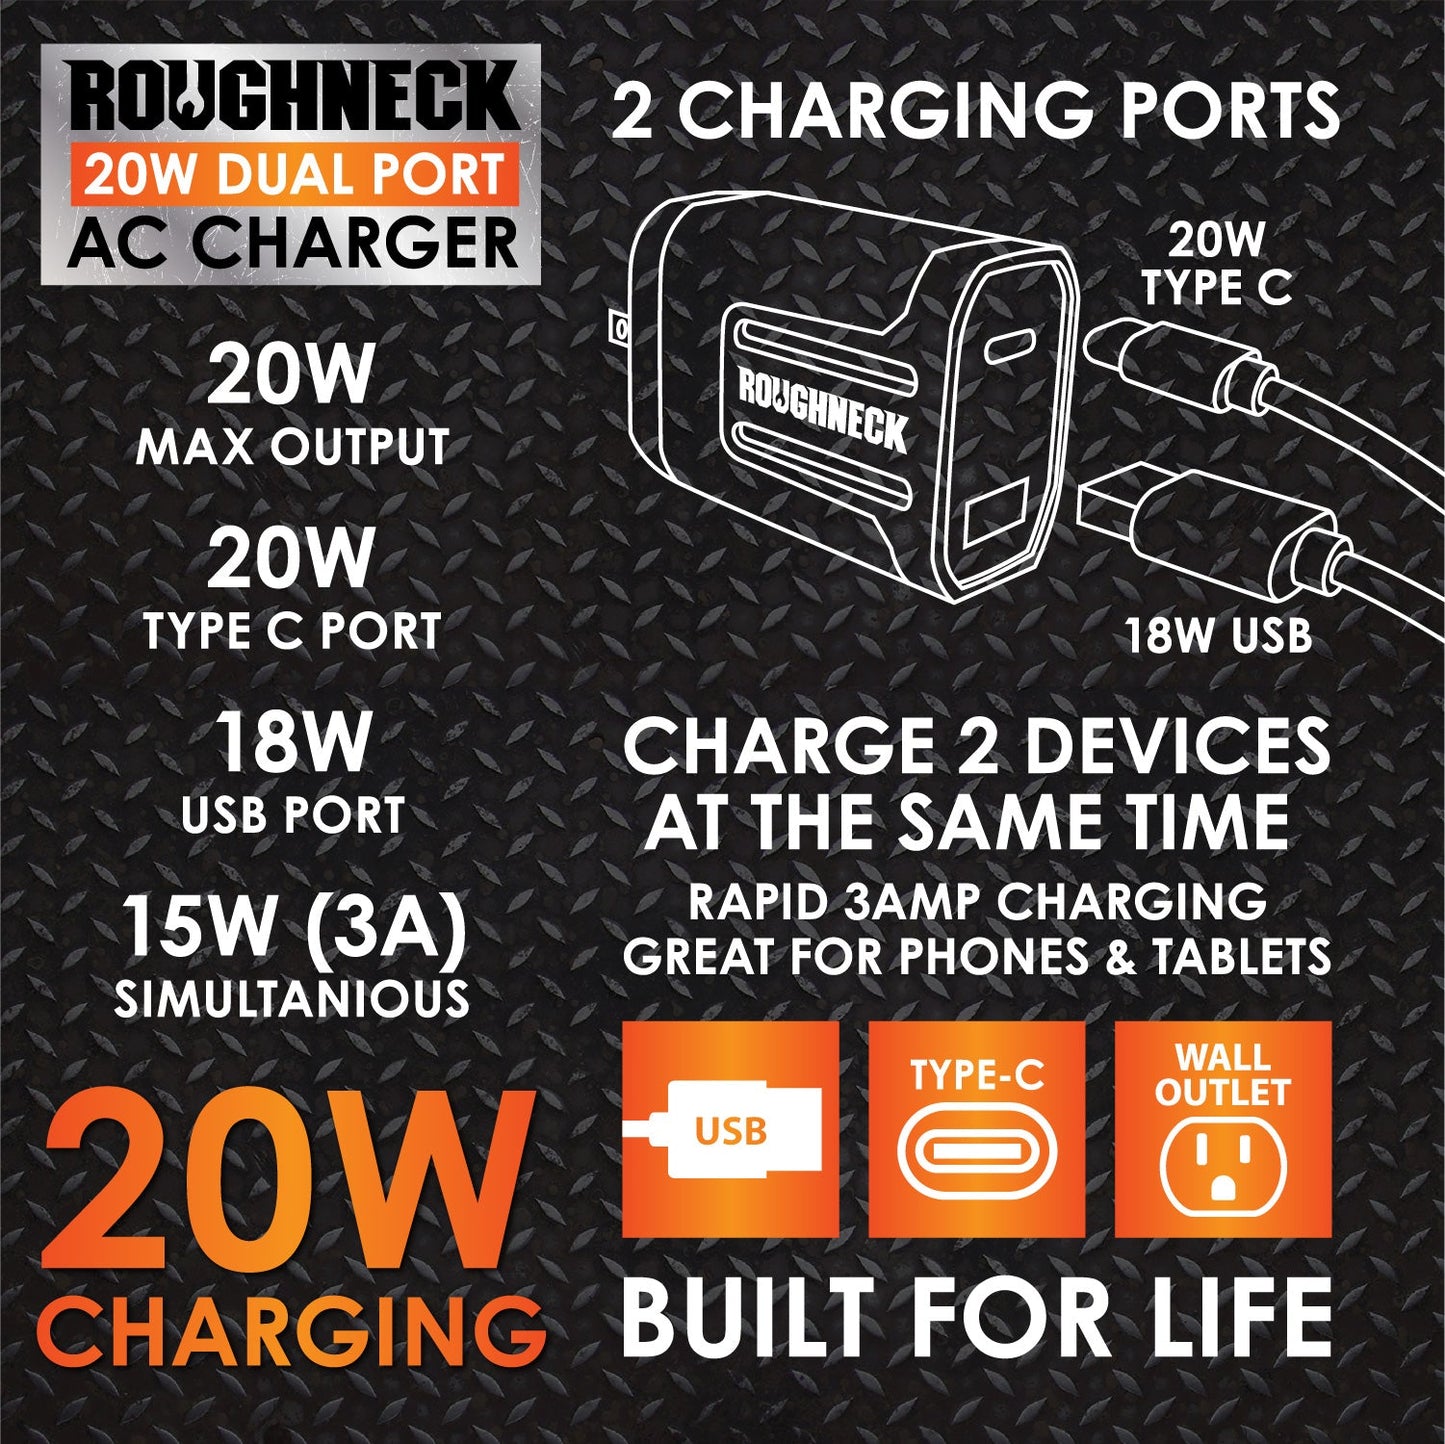 ITEM NUMBER 023689MN ROUGHNECK AC CHARGER 4 PIECES PER PACK